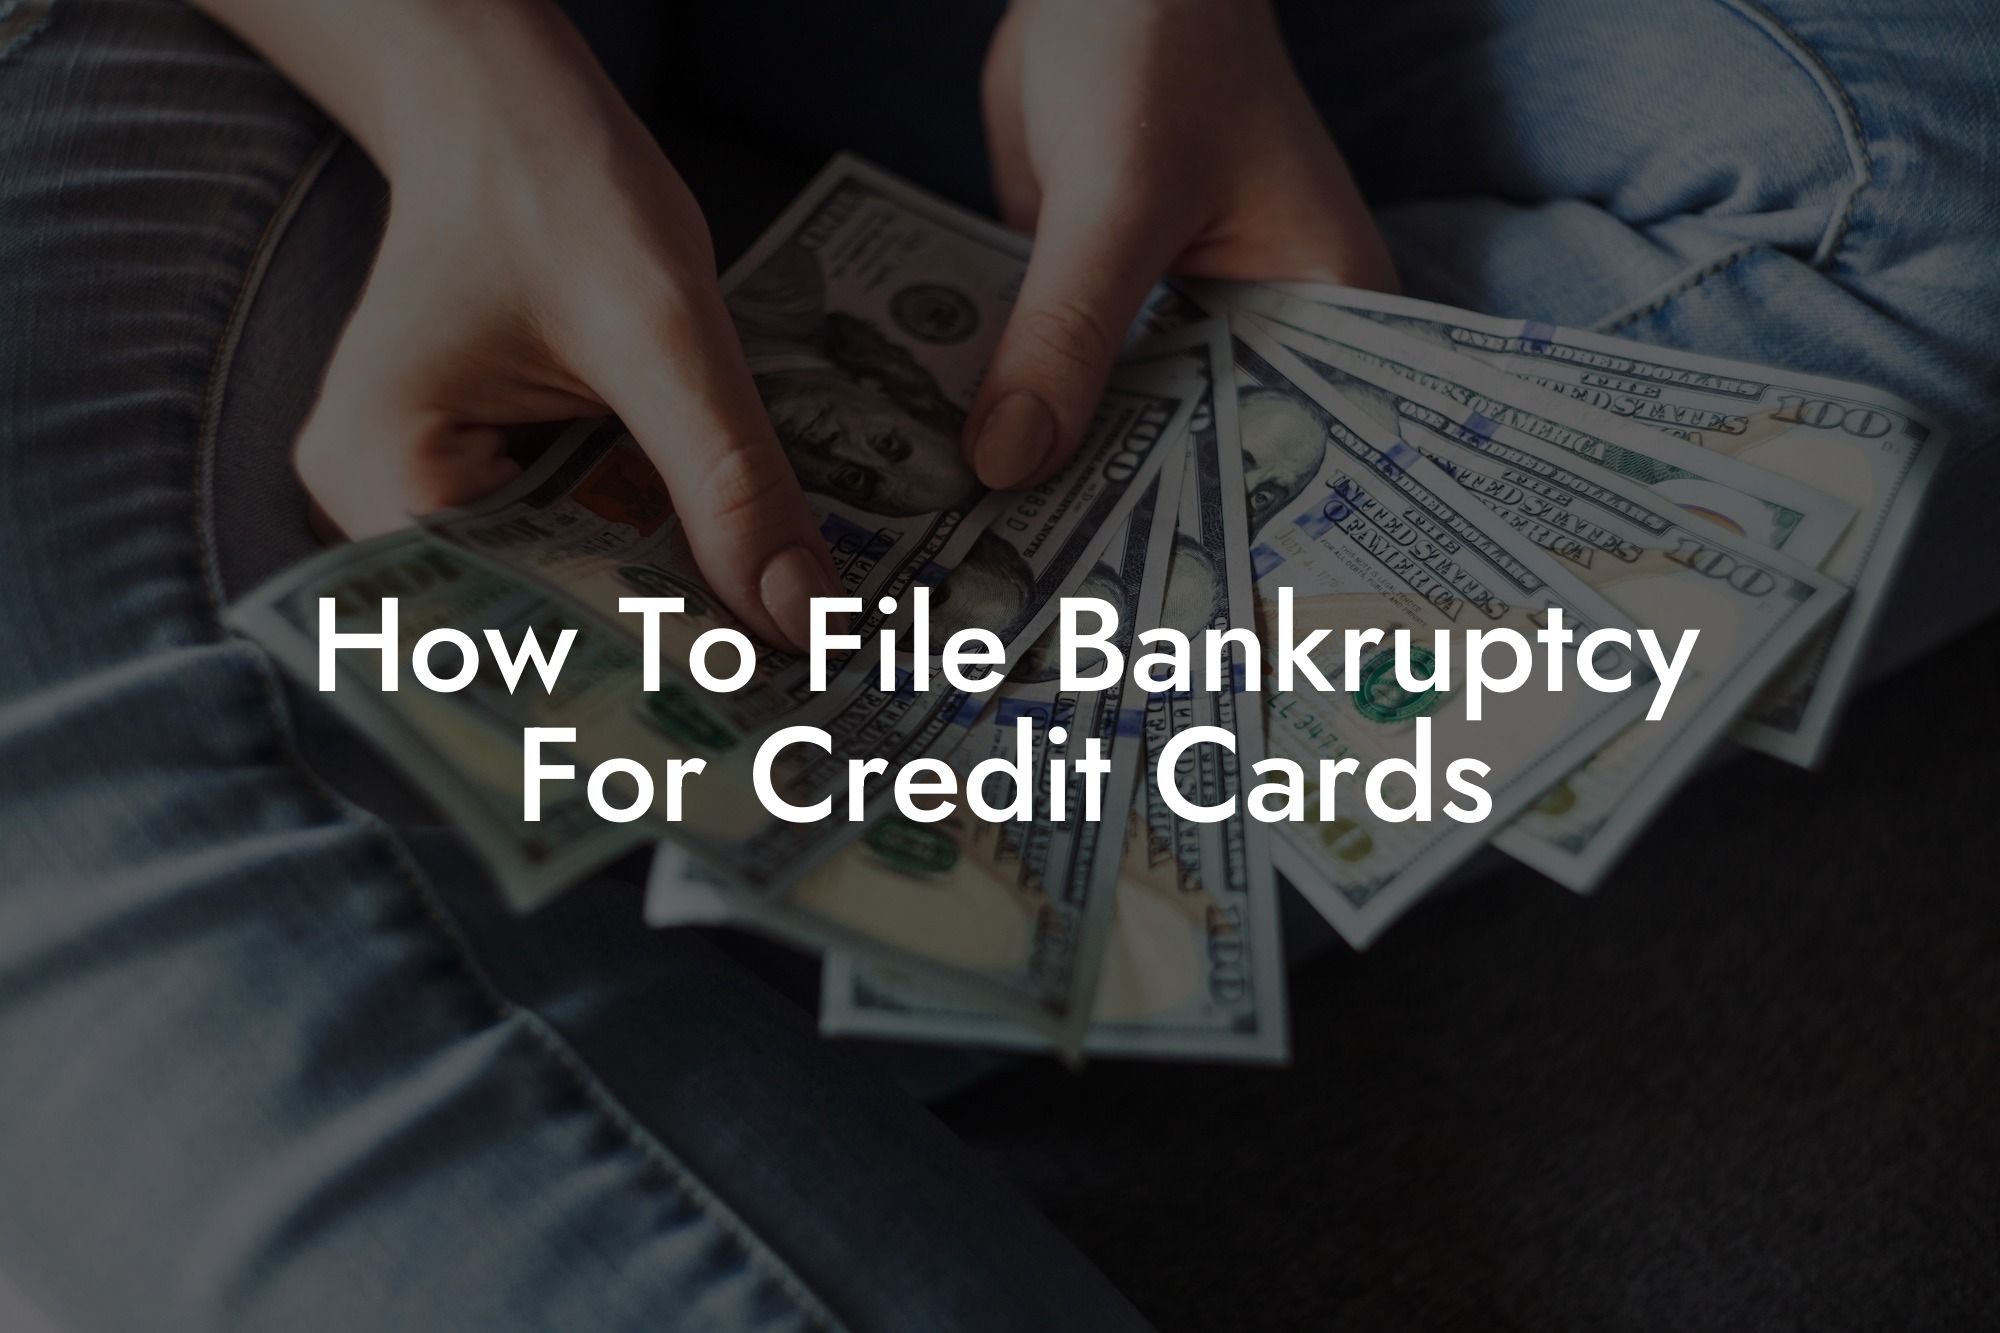 How To File Bankruptcy For Credit Cards